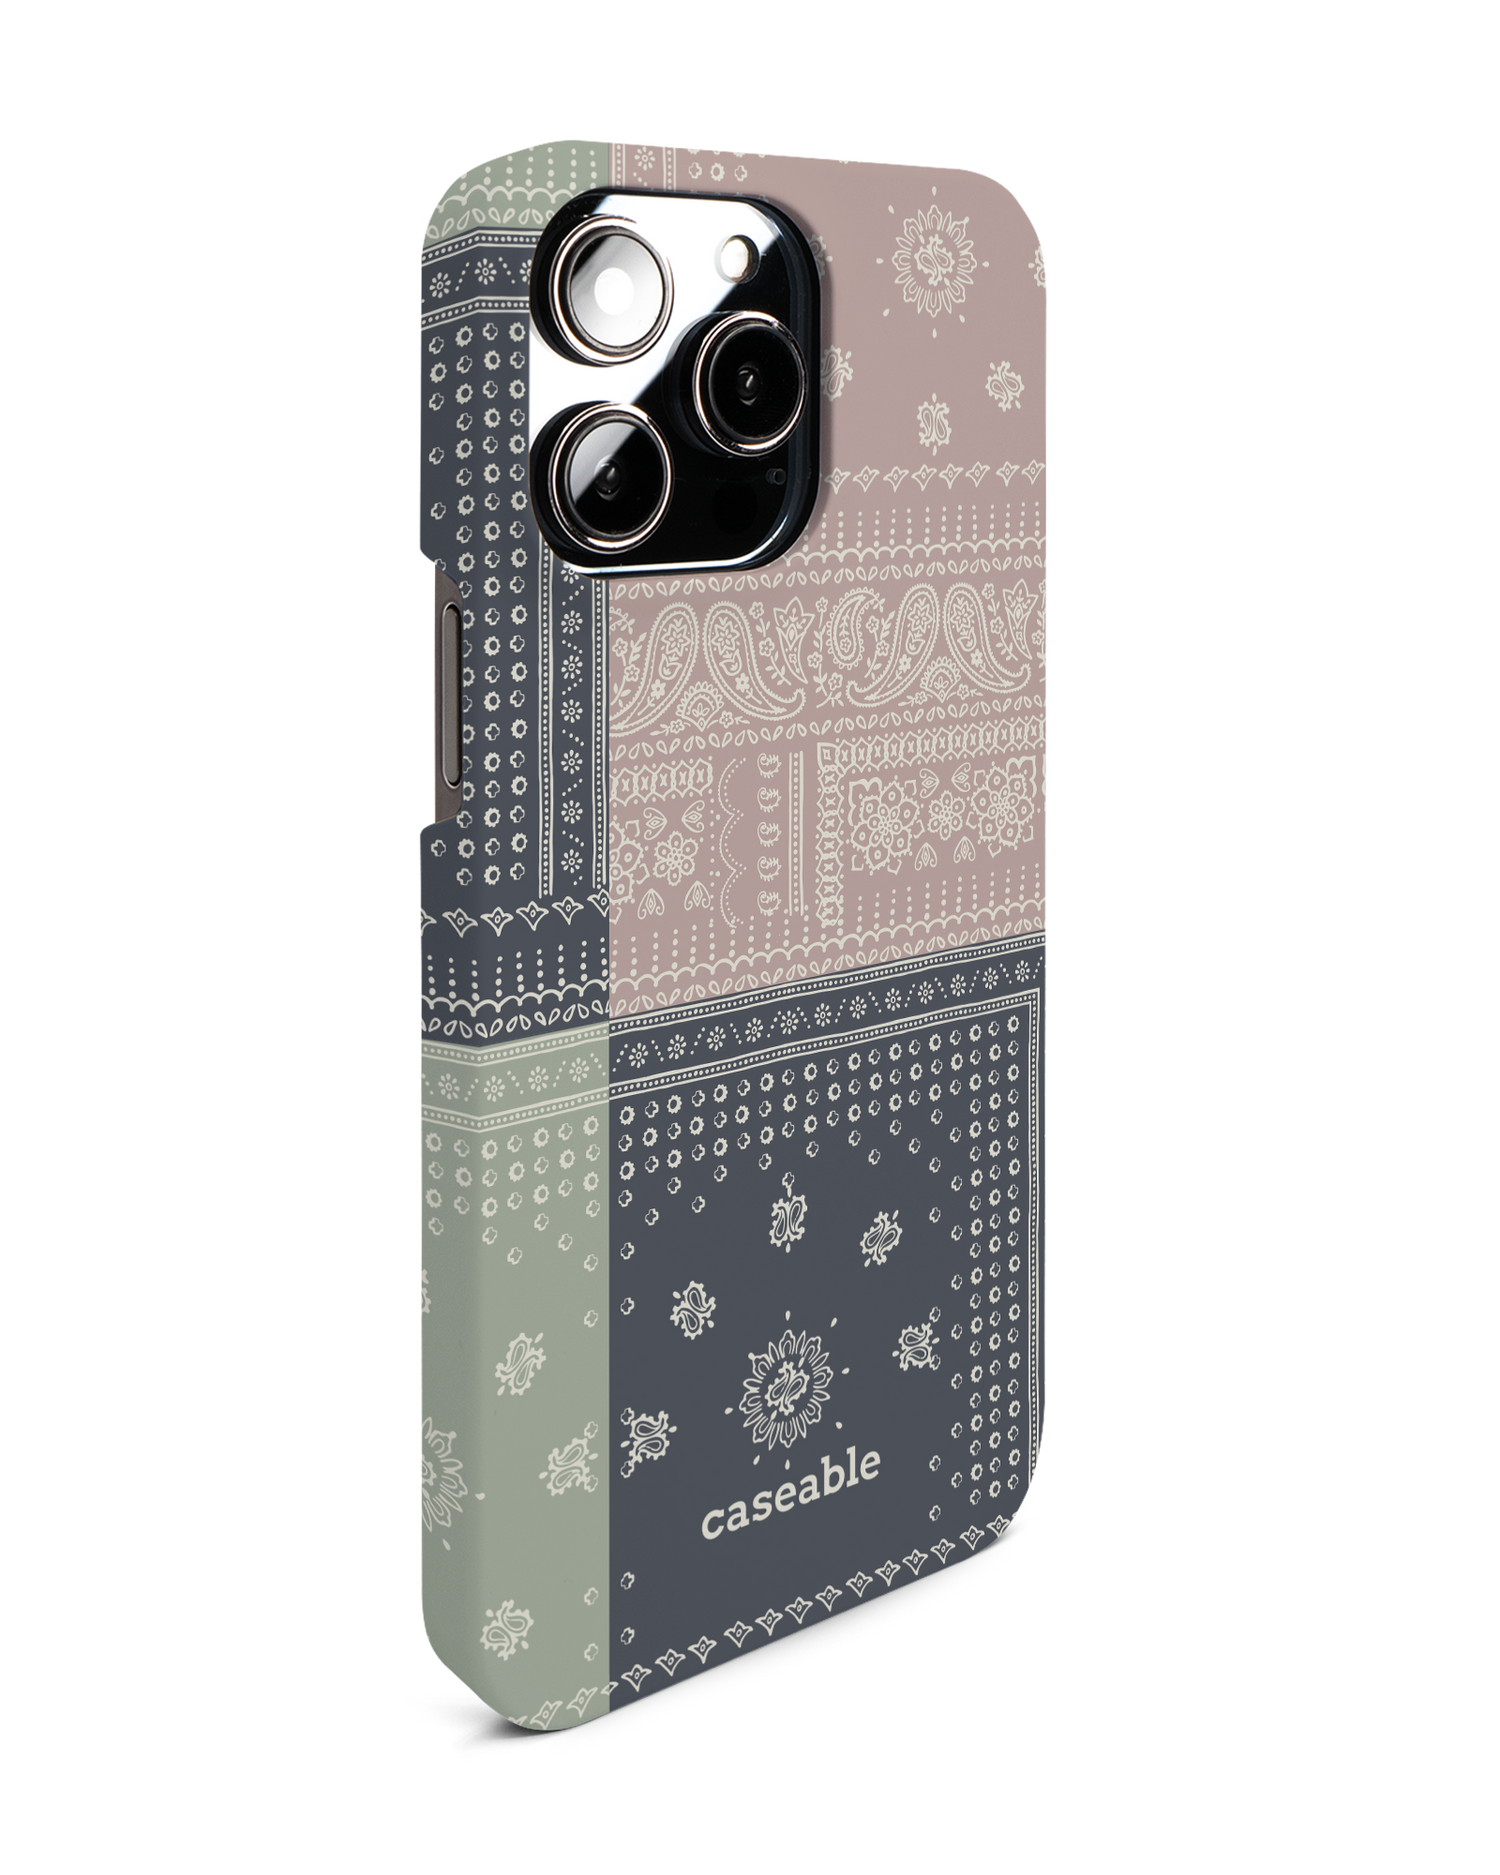 Bandana Patchwork Hard Shell Phone Case for Apple iPhone 14 Pro Max: View from the left side